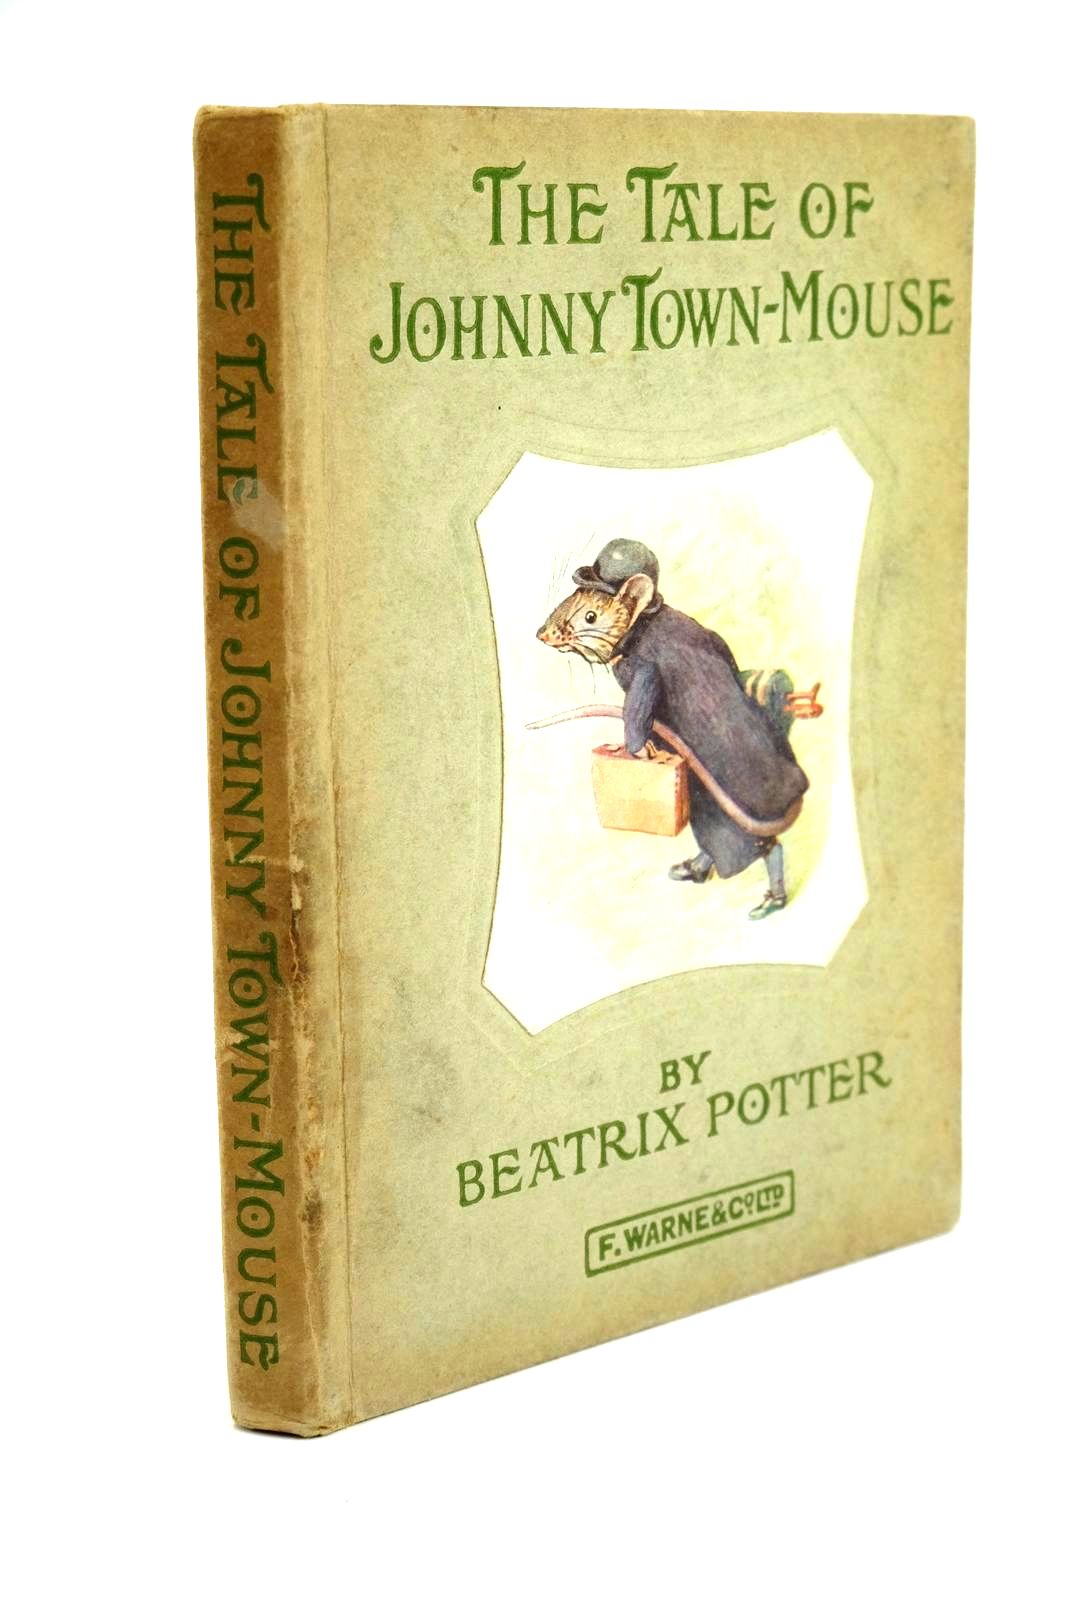 Photo of THE TALE OF JOHNNY TOWN-MOUSE written by Potter, Beatrix illustrated by Potter, Beatrix published by Frederick Warne &amp; Co Ltd. (STOCK CODE: 1321686)  for sale by Stella & Rose's Books